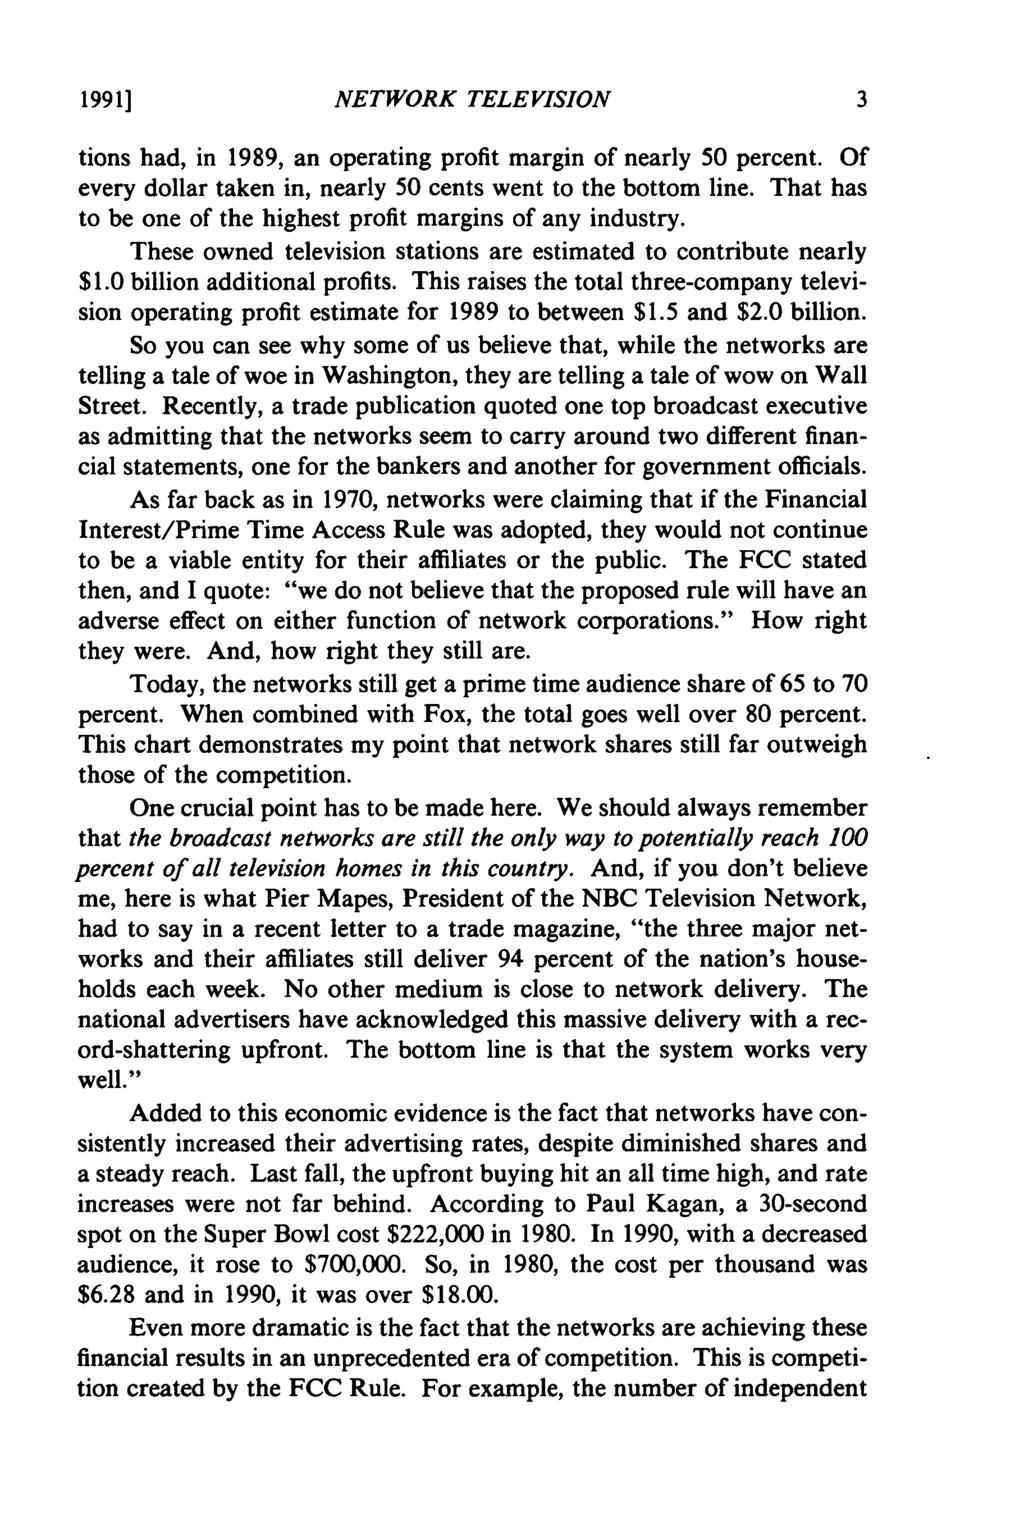 1991] NETWORK TELEVISION tions had, in 1989, an operating profit margin of nearly 50 percent. Of every dollar taken in, nearly 50 cents went to the bottom line.